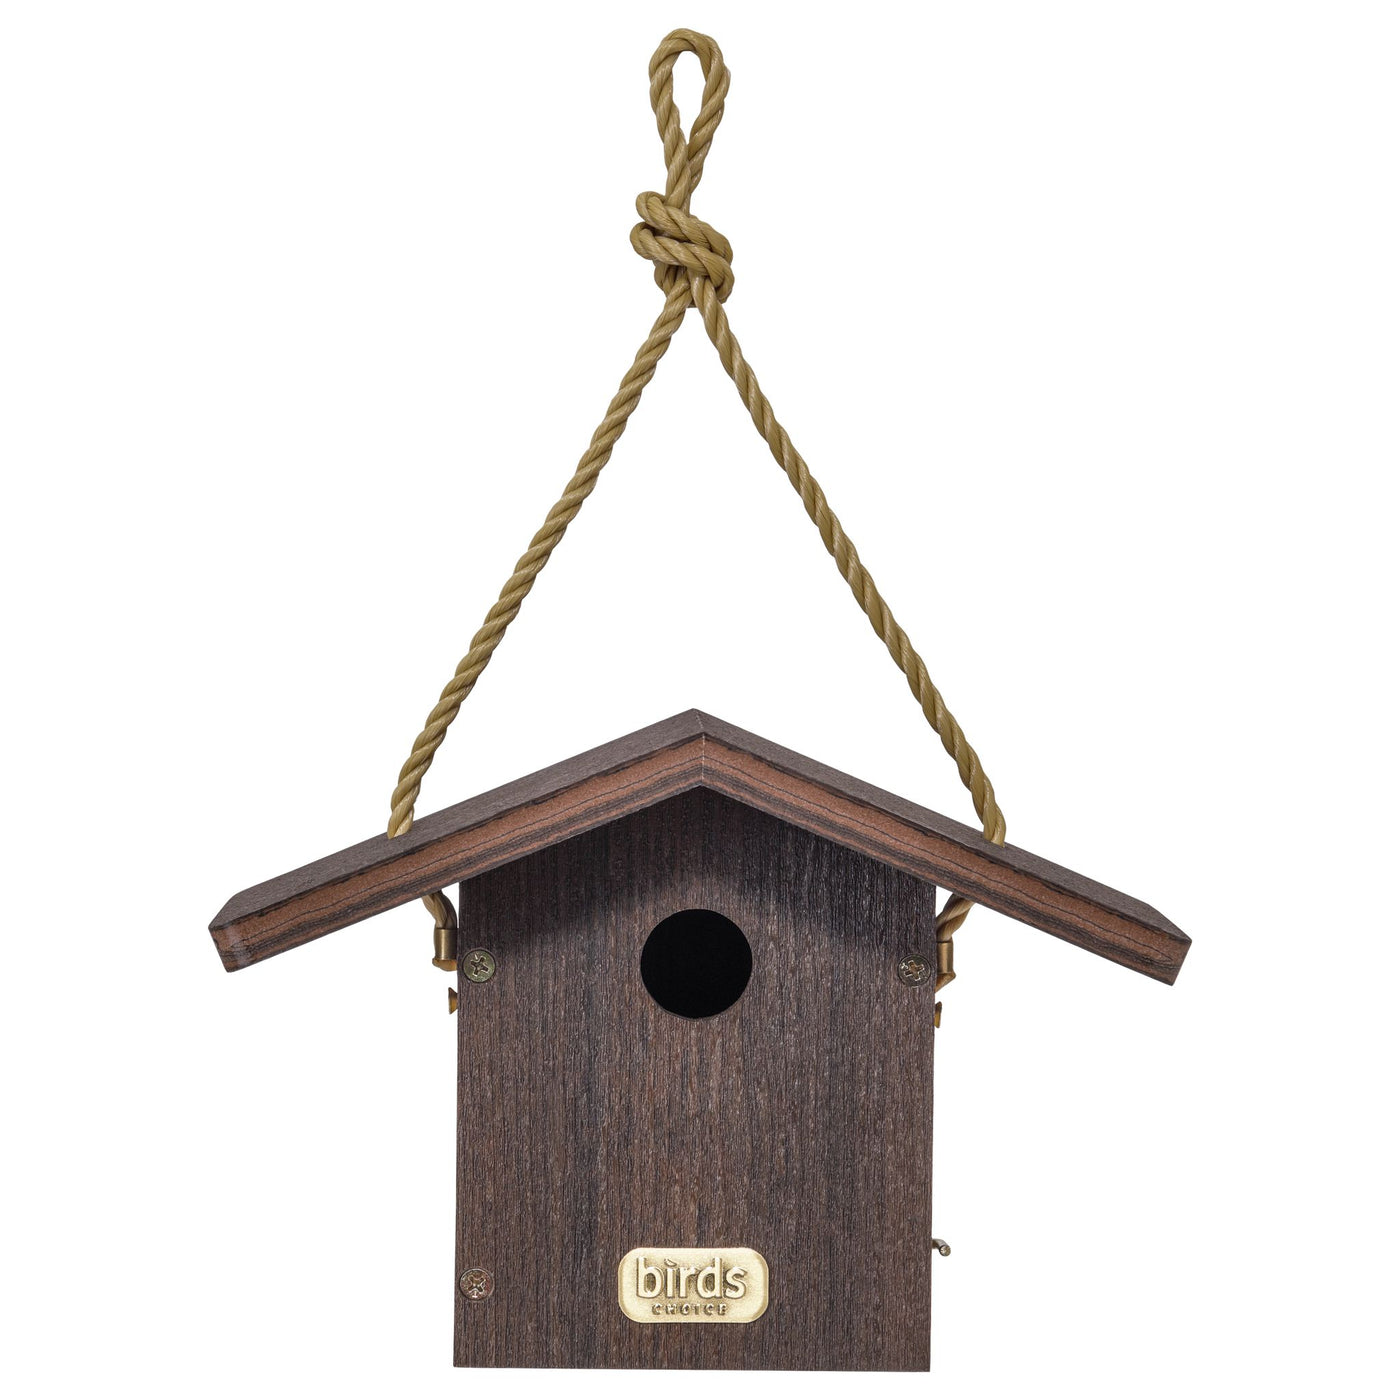 Wren House Spruce Creek Collection in Brazilian Walnut Recycled Plastic - Birds Choice